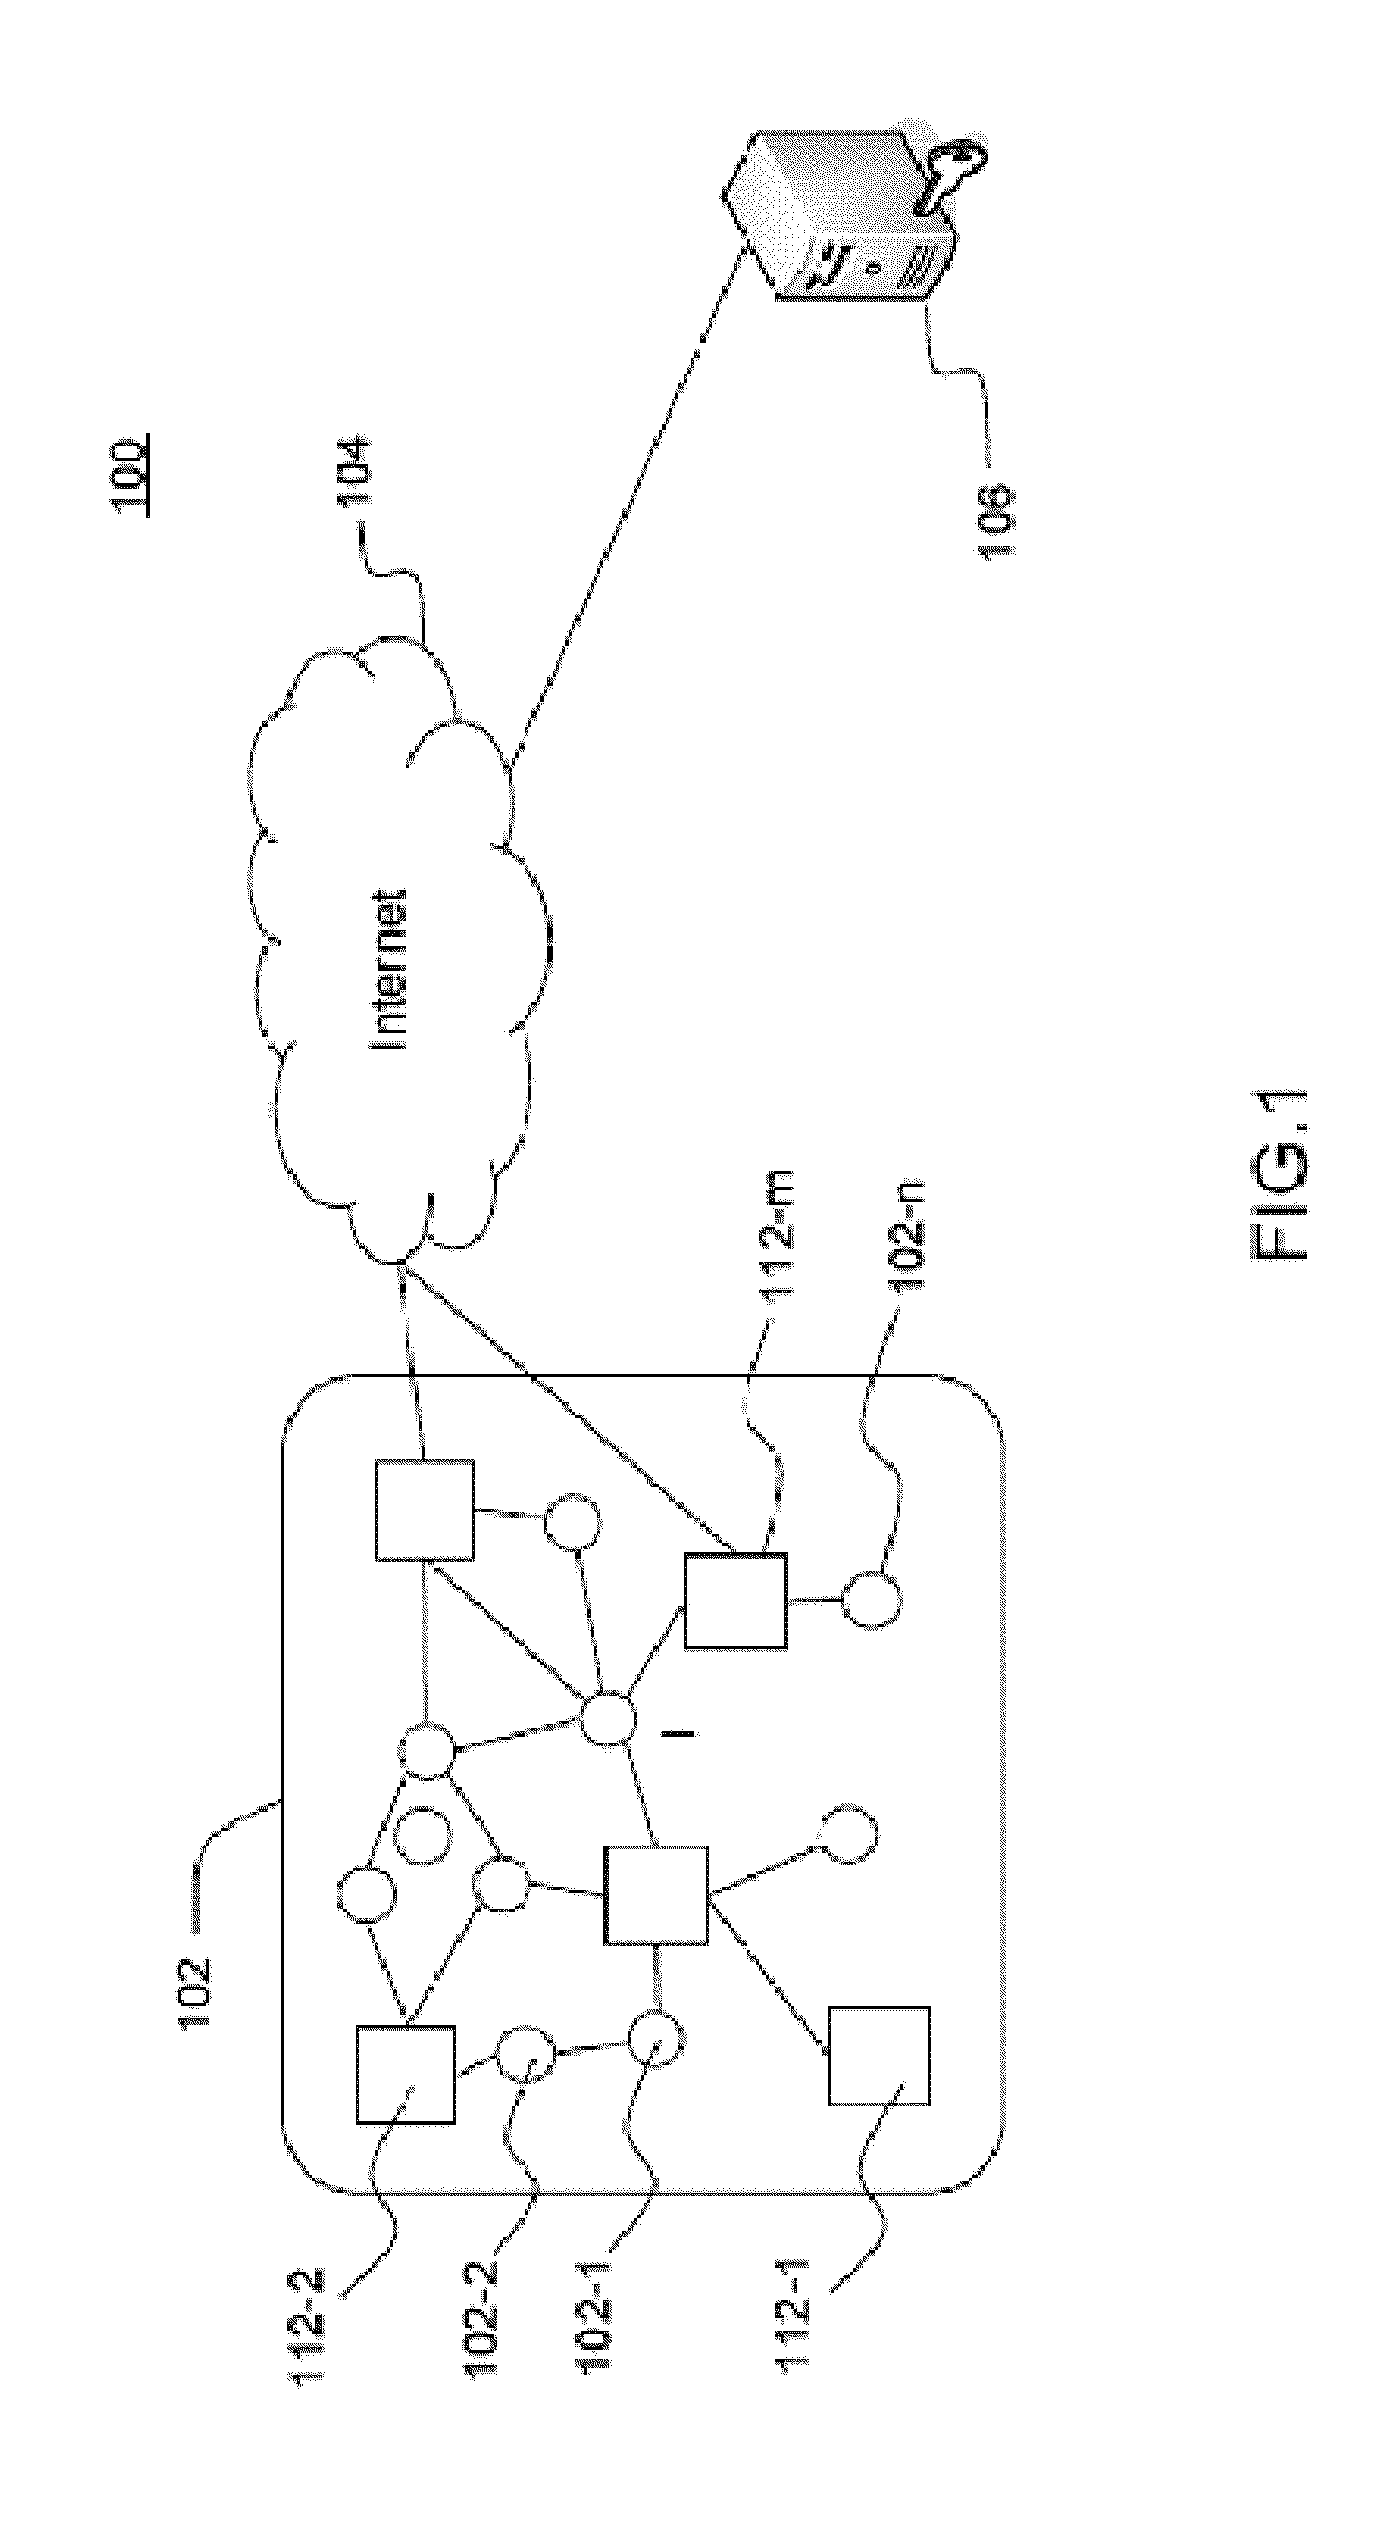 Device and method for generating a session key